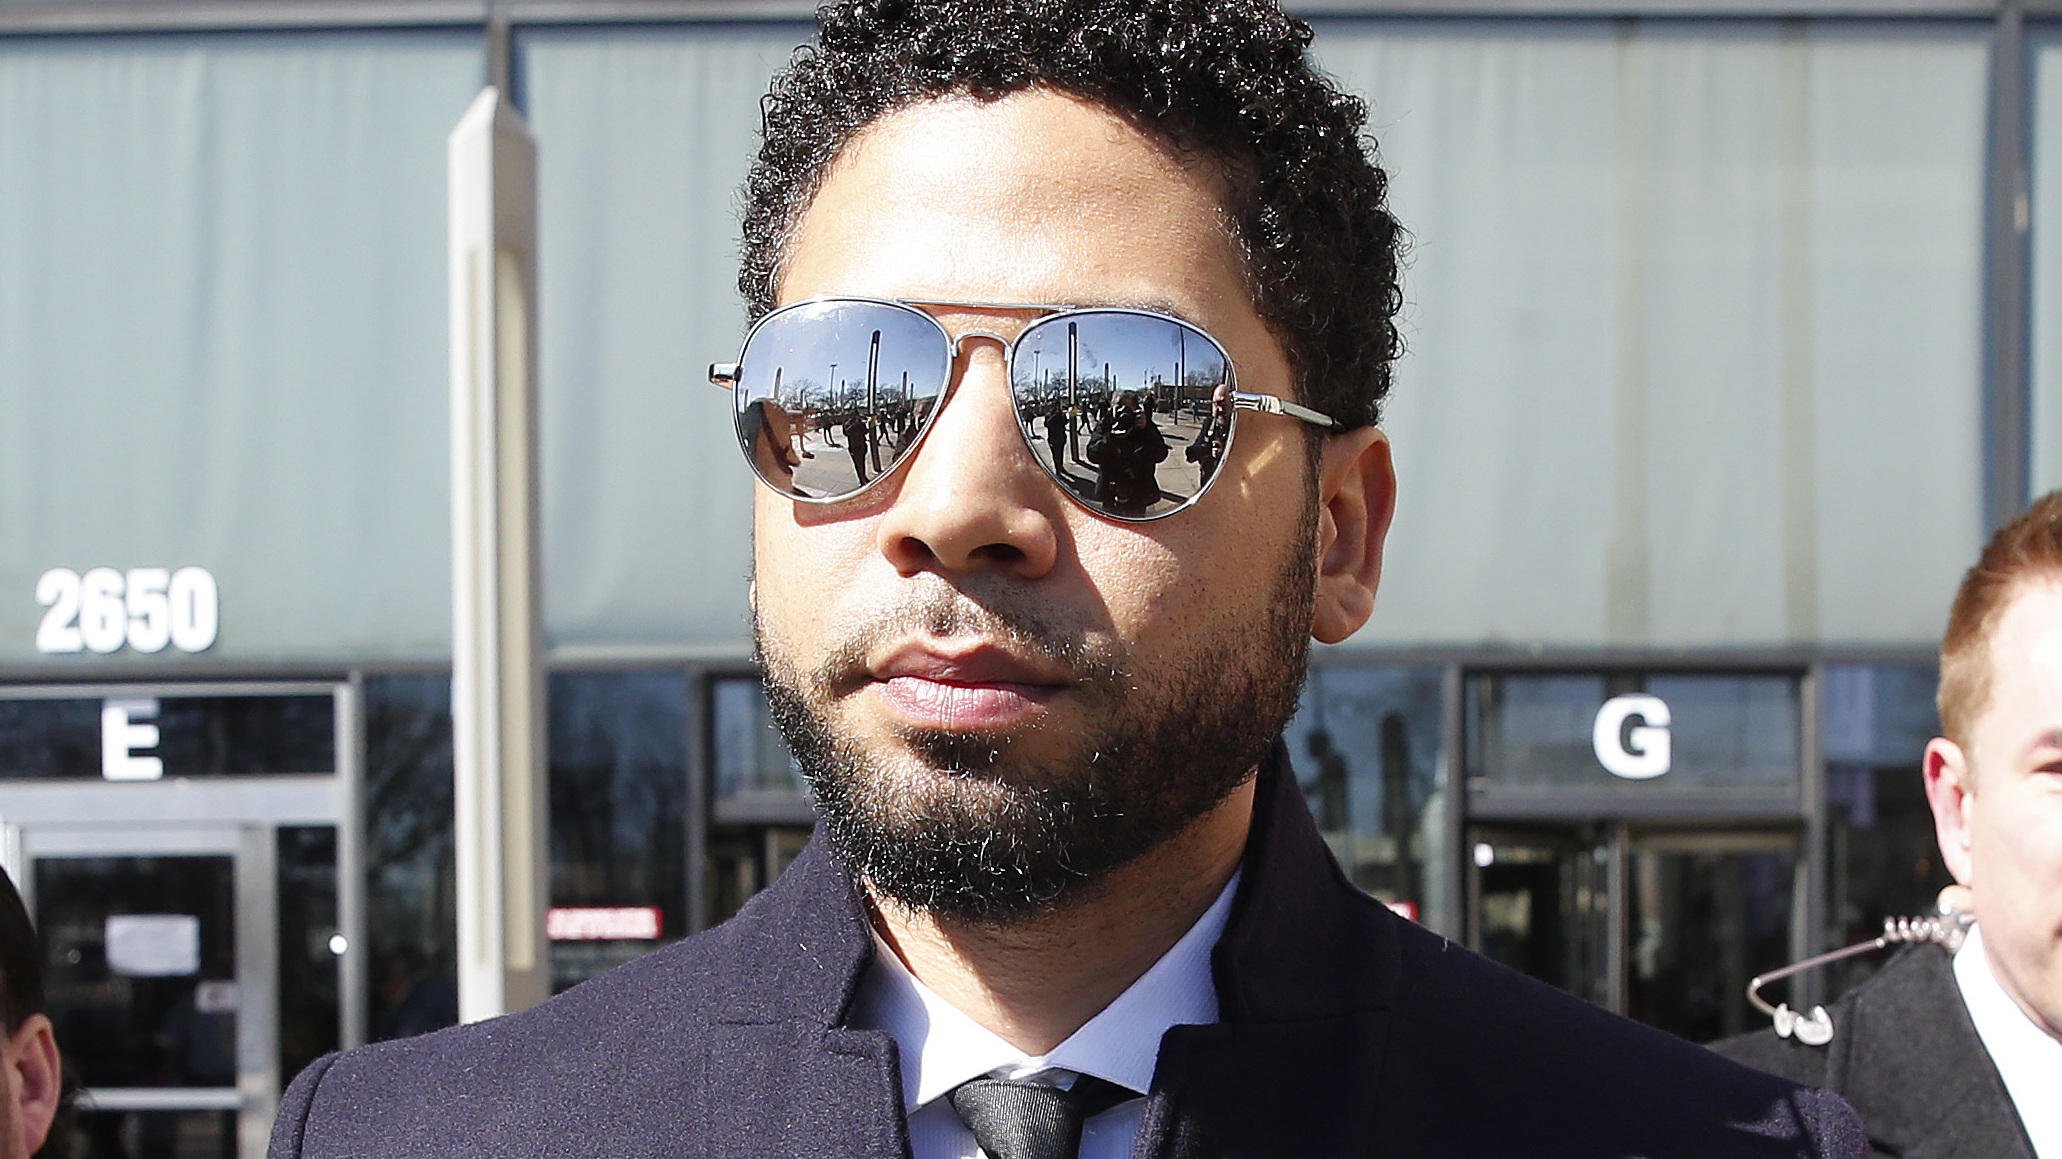 Judge Orders Special Prosecutor To Review Handling Of Jussie Smollett Case | NPR Illinois